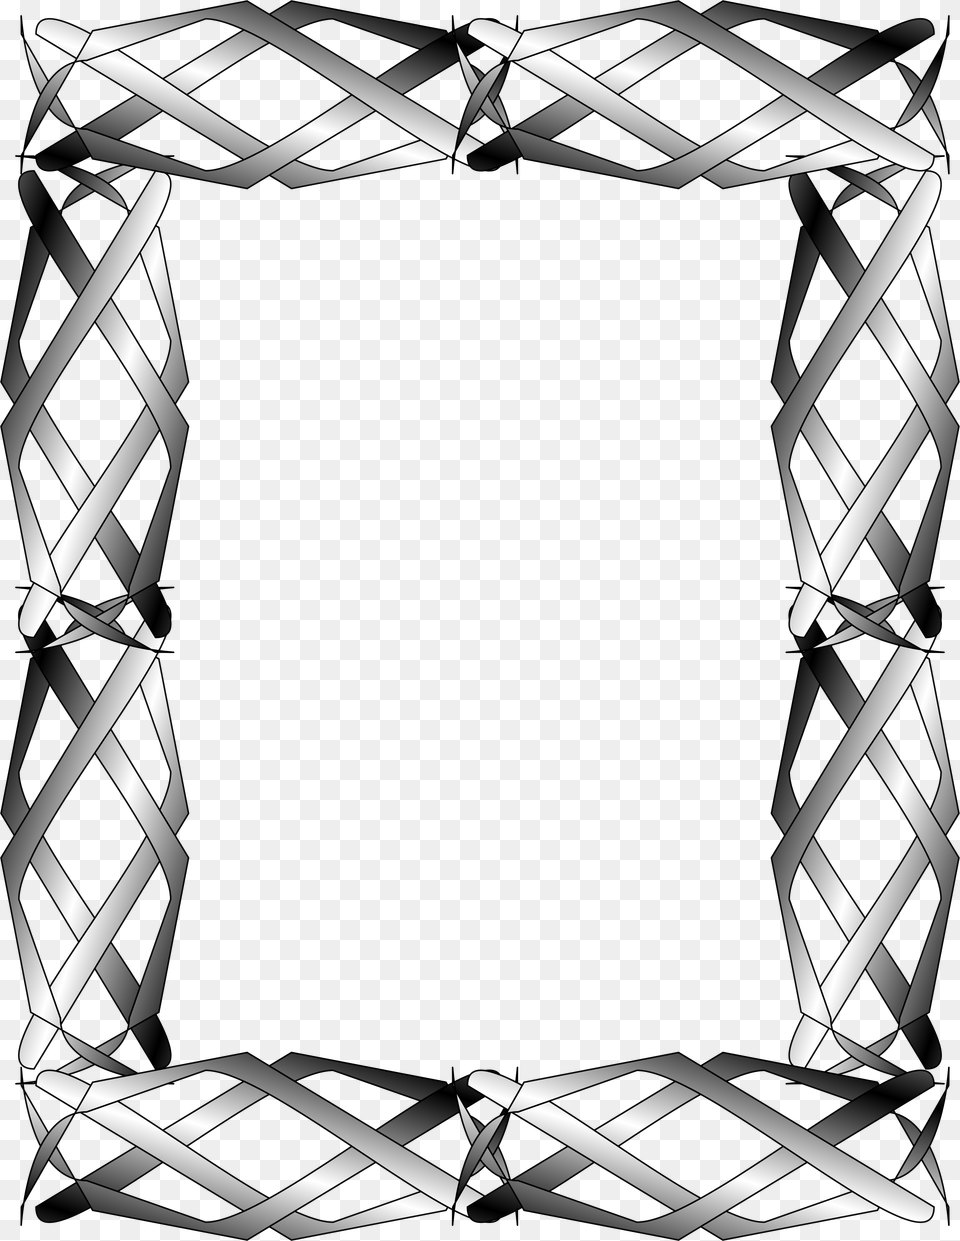 Celtic Silver Frame Border No Ratings Yet Volleyball Frame Clip Art, Accessories, Bulldozer, Machine, Pattern Png